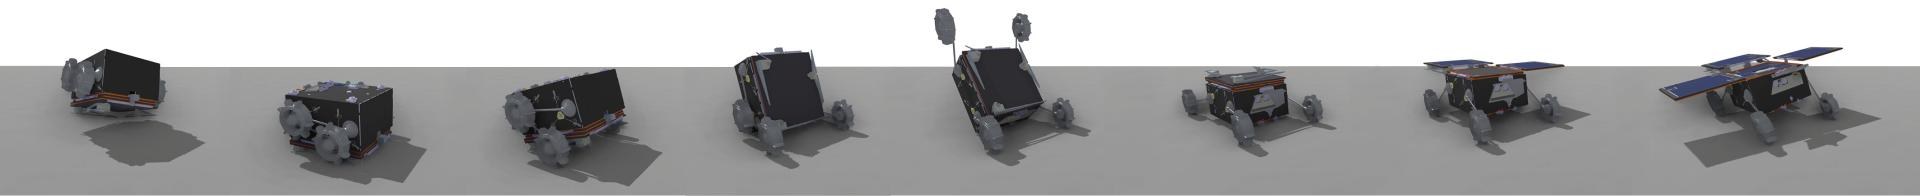 Landing and uprighting process of the MMX rover